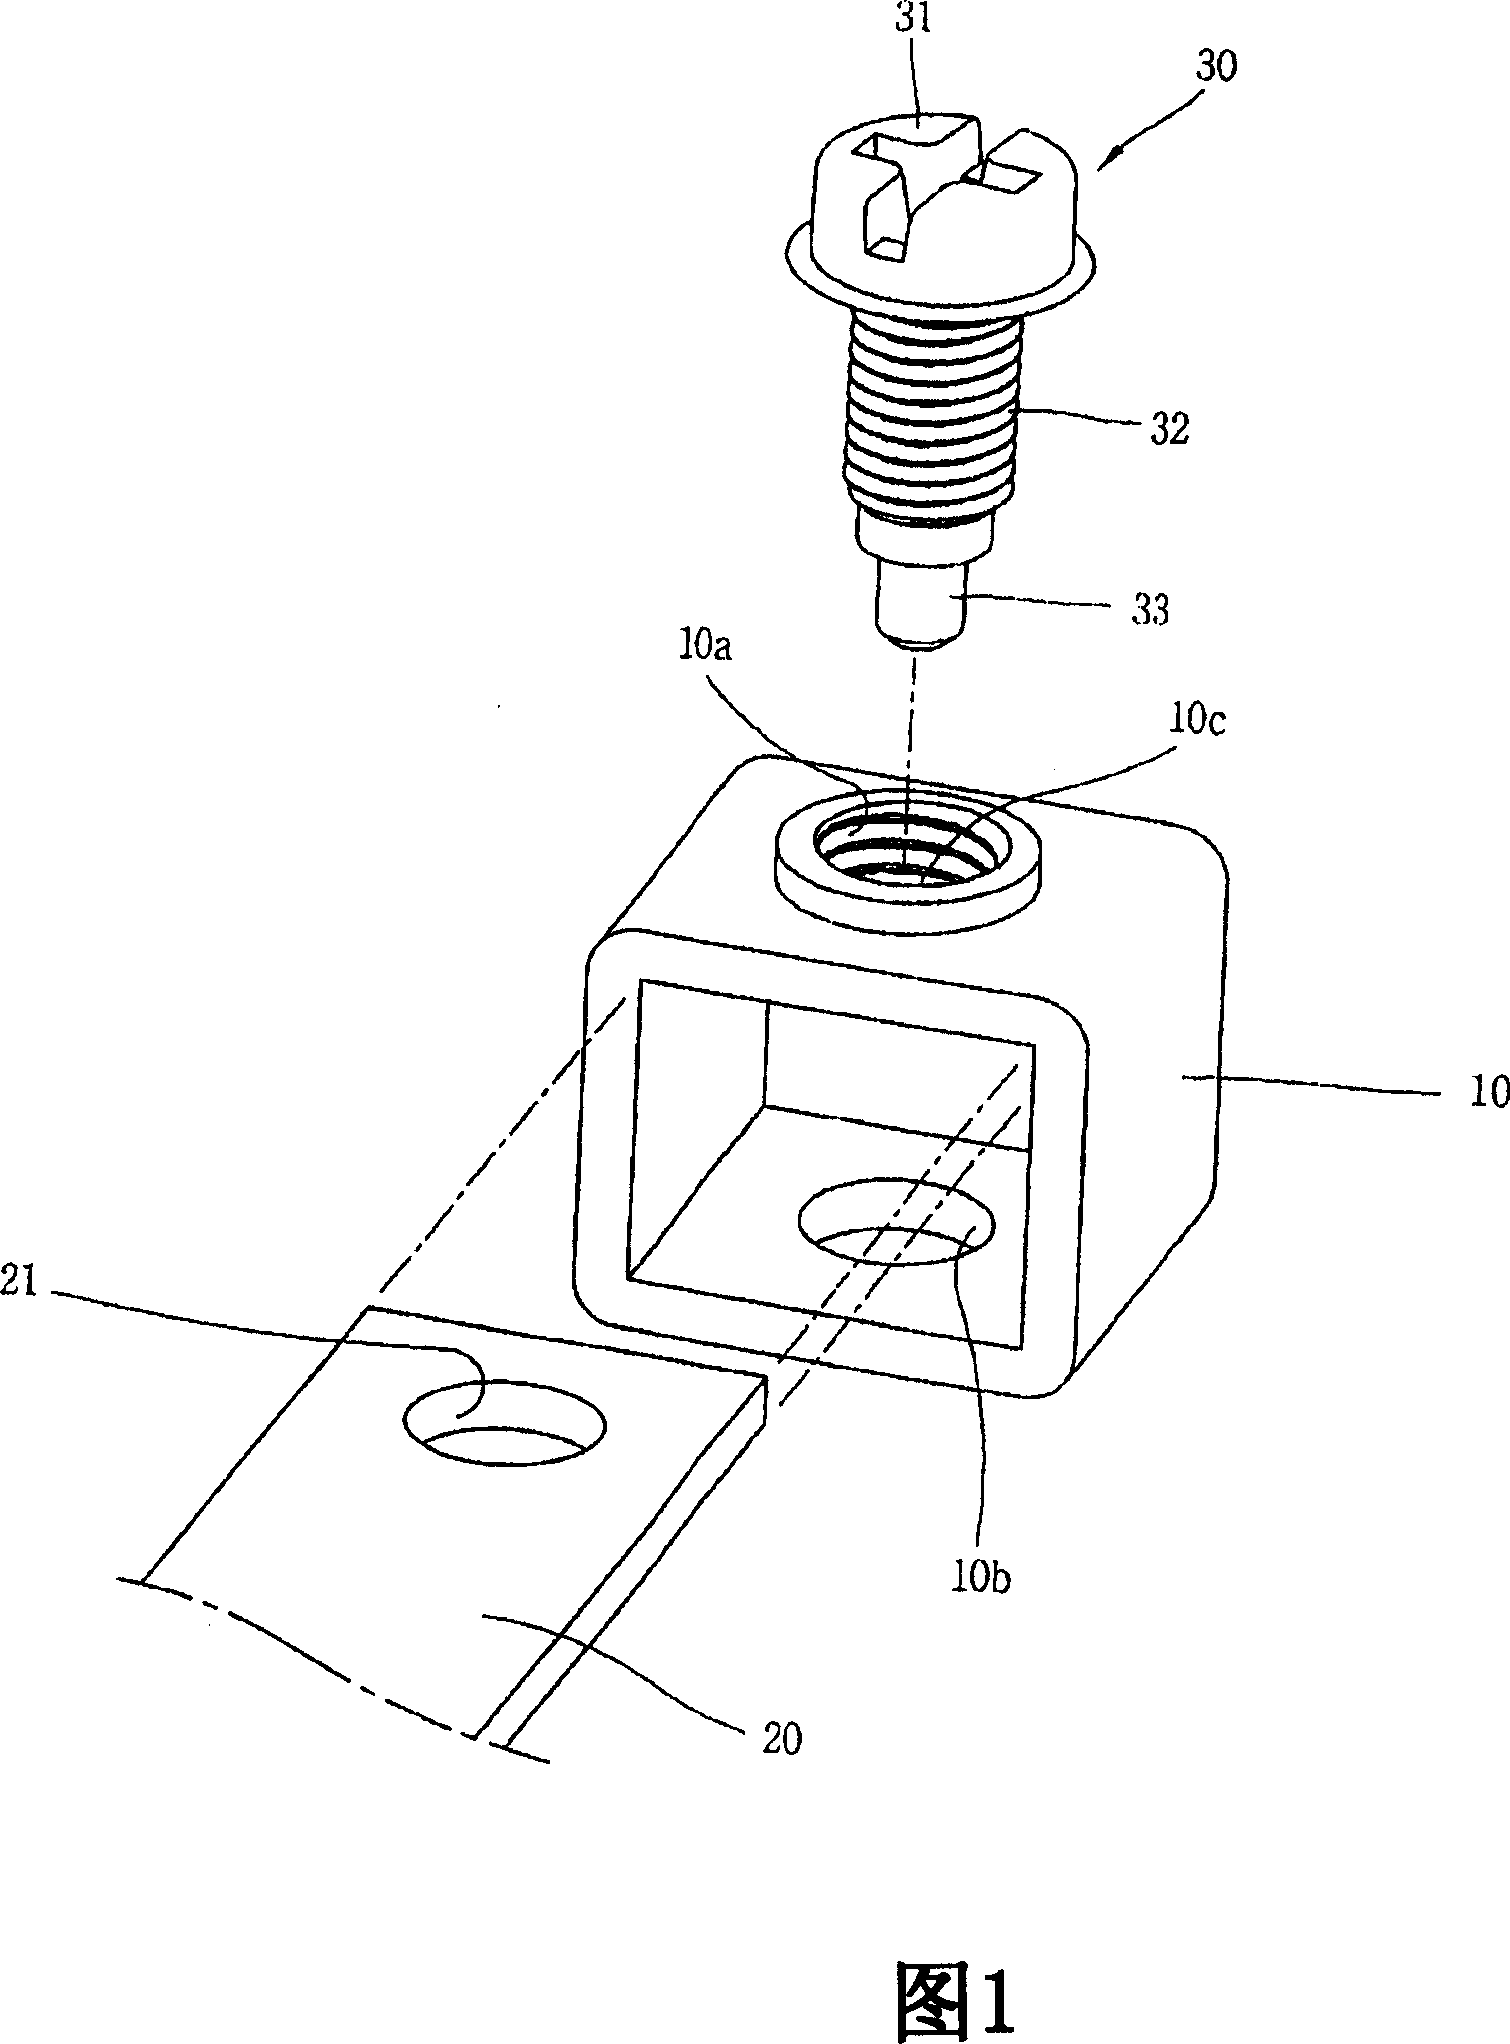 Coil terminal assembly for magnetic contactor